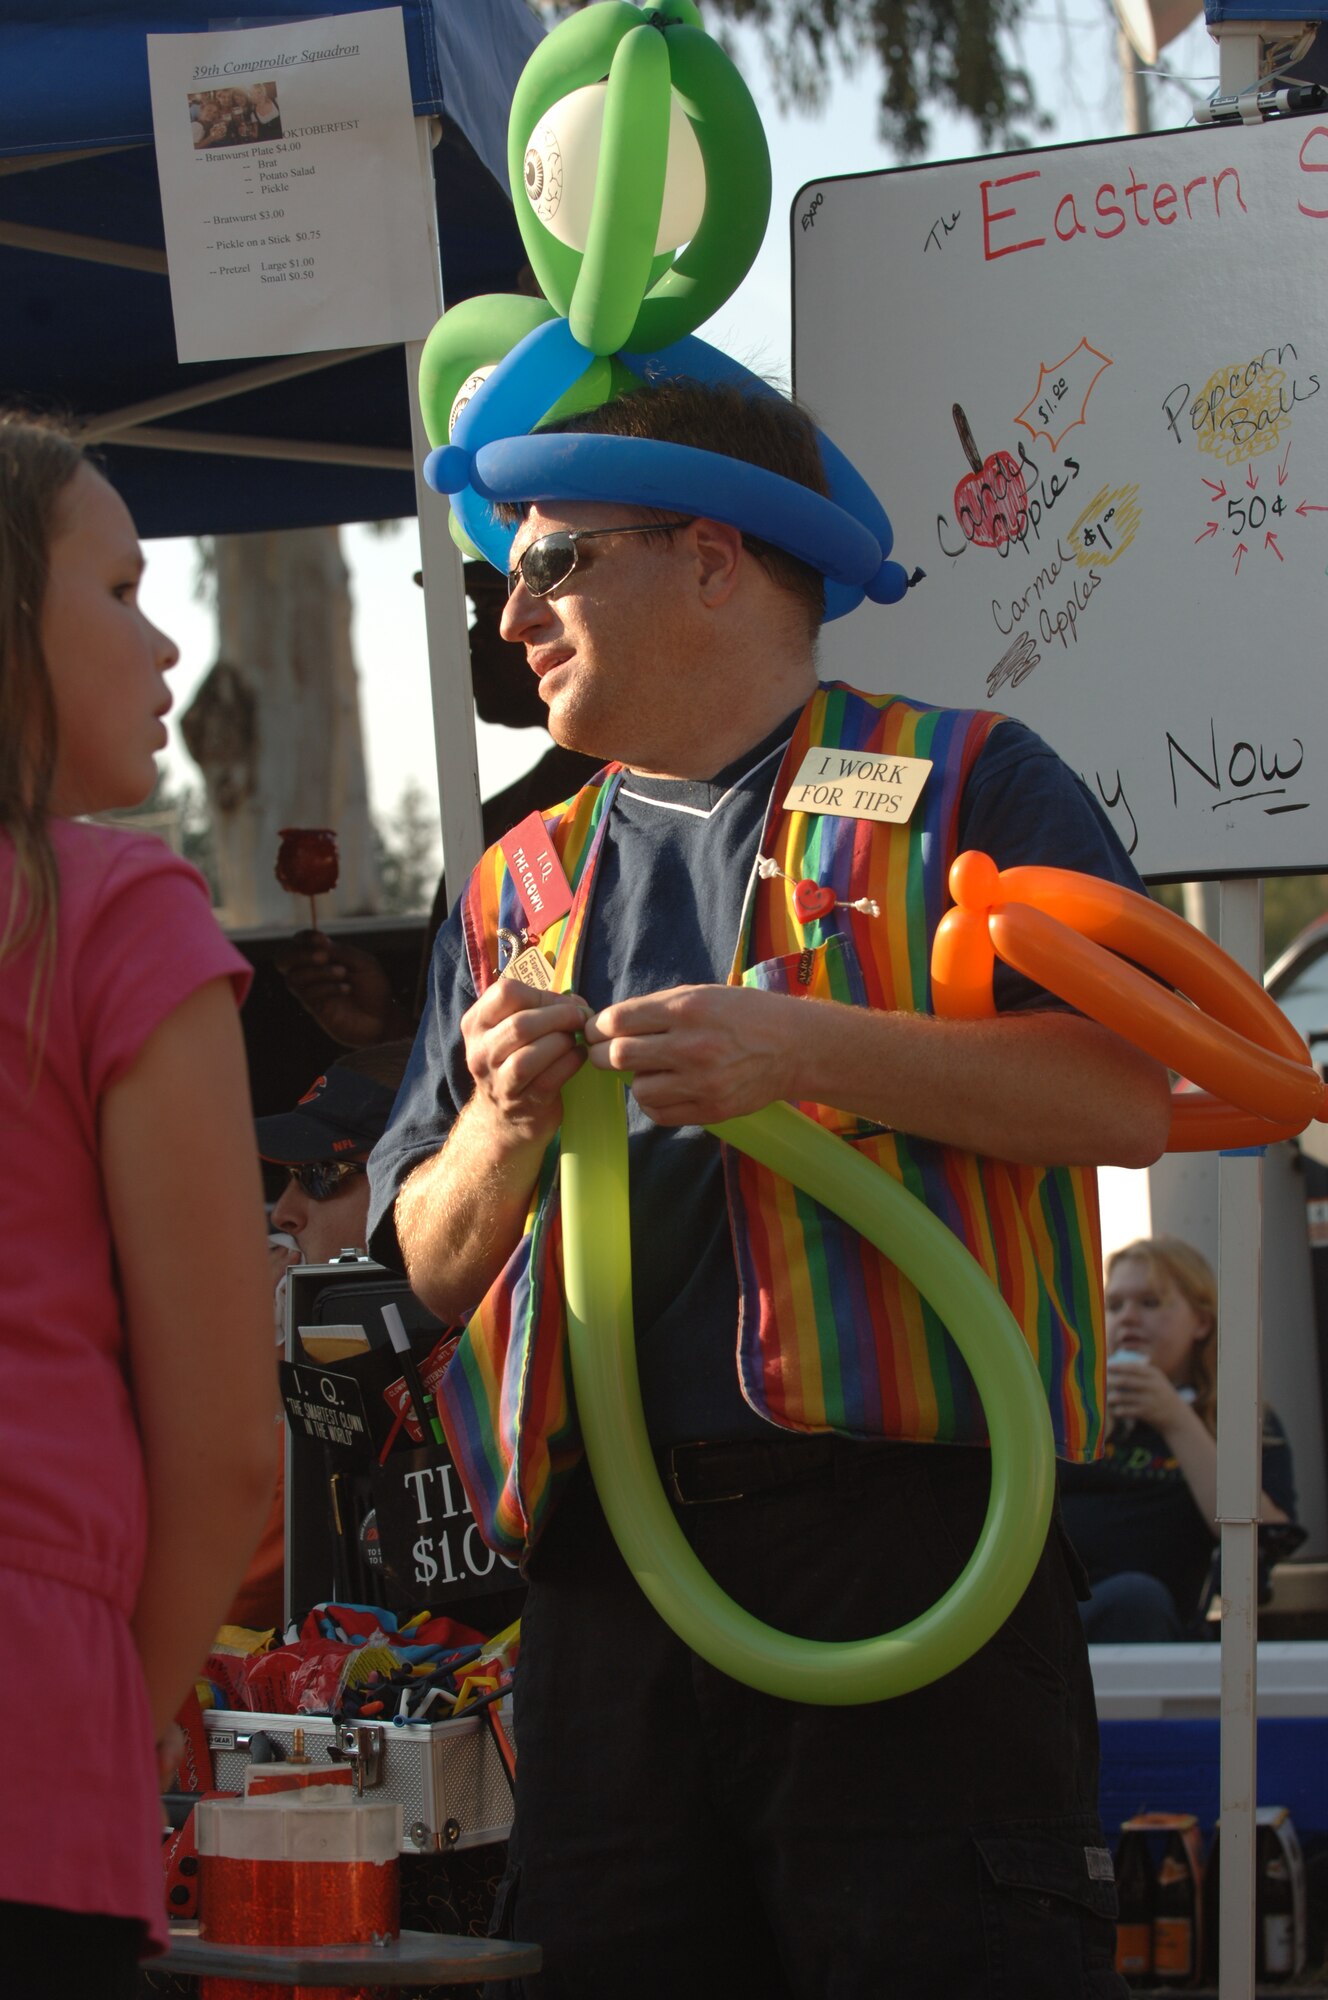 Senior Master Sergeant Thomas Benson, 39th Comptroller Squadron superintendent, makes balloon animals for a young girl during Octoberfest. (U.S. Air Force photo by Airman Nathan Lipscomb)